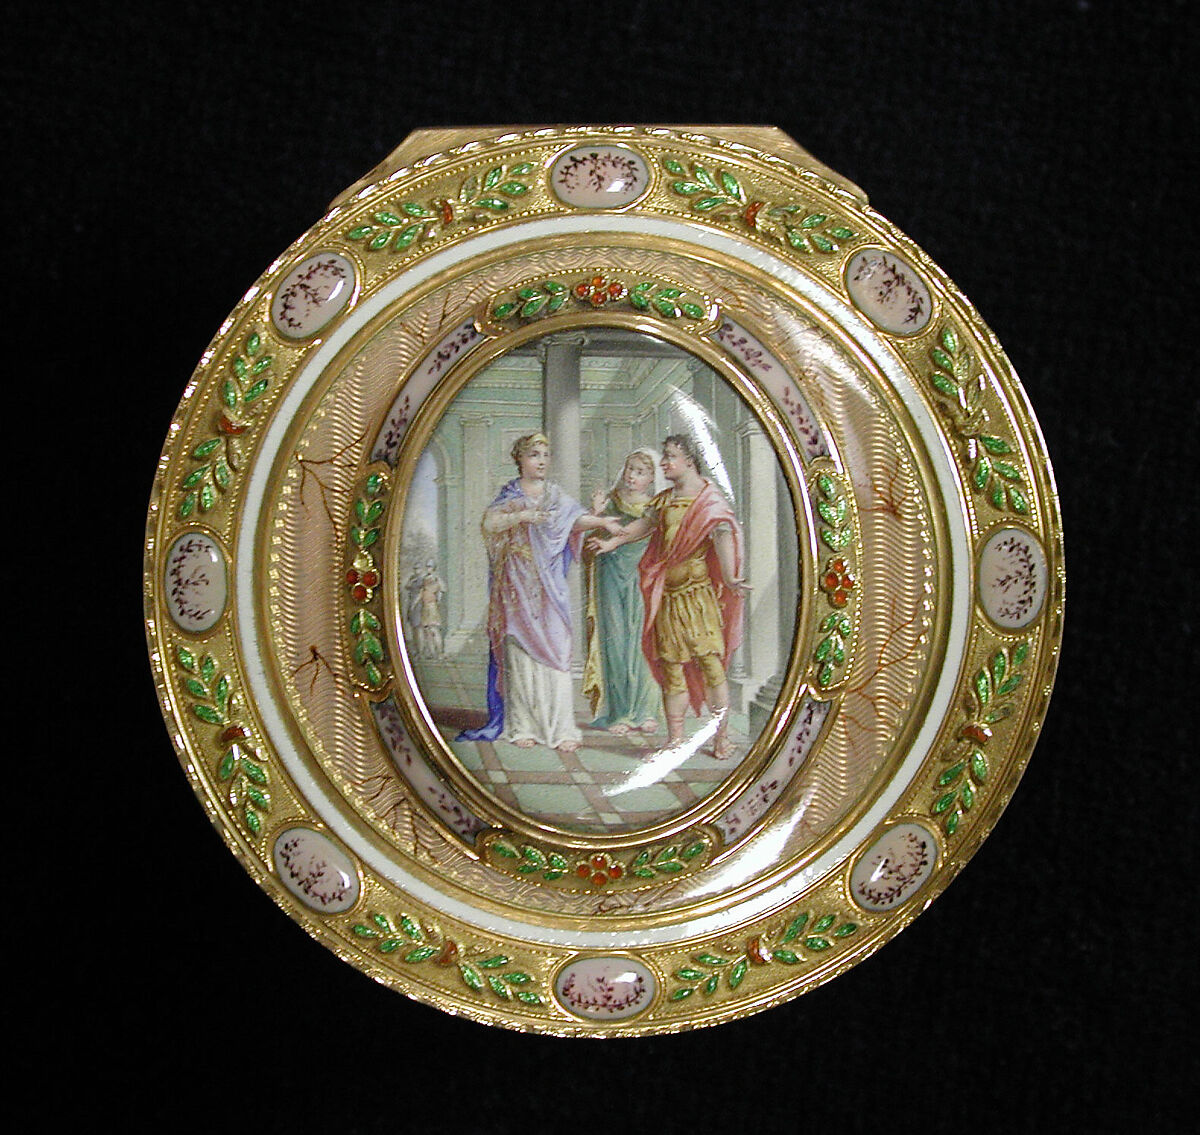 Snuffbox with miniature depicting the return of Theseus, Probably by Barthélemy Pillieux (apprenticed 1764, master 1774, active 1790), Gold, enamel, French, Paris 